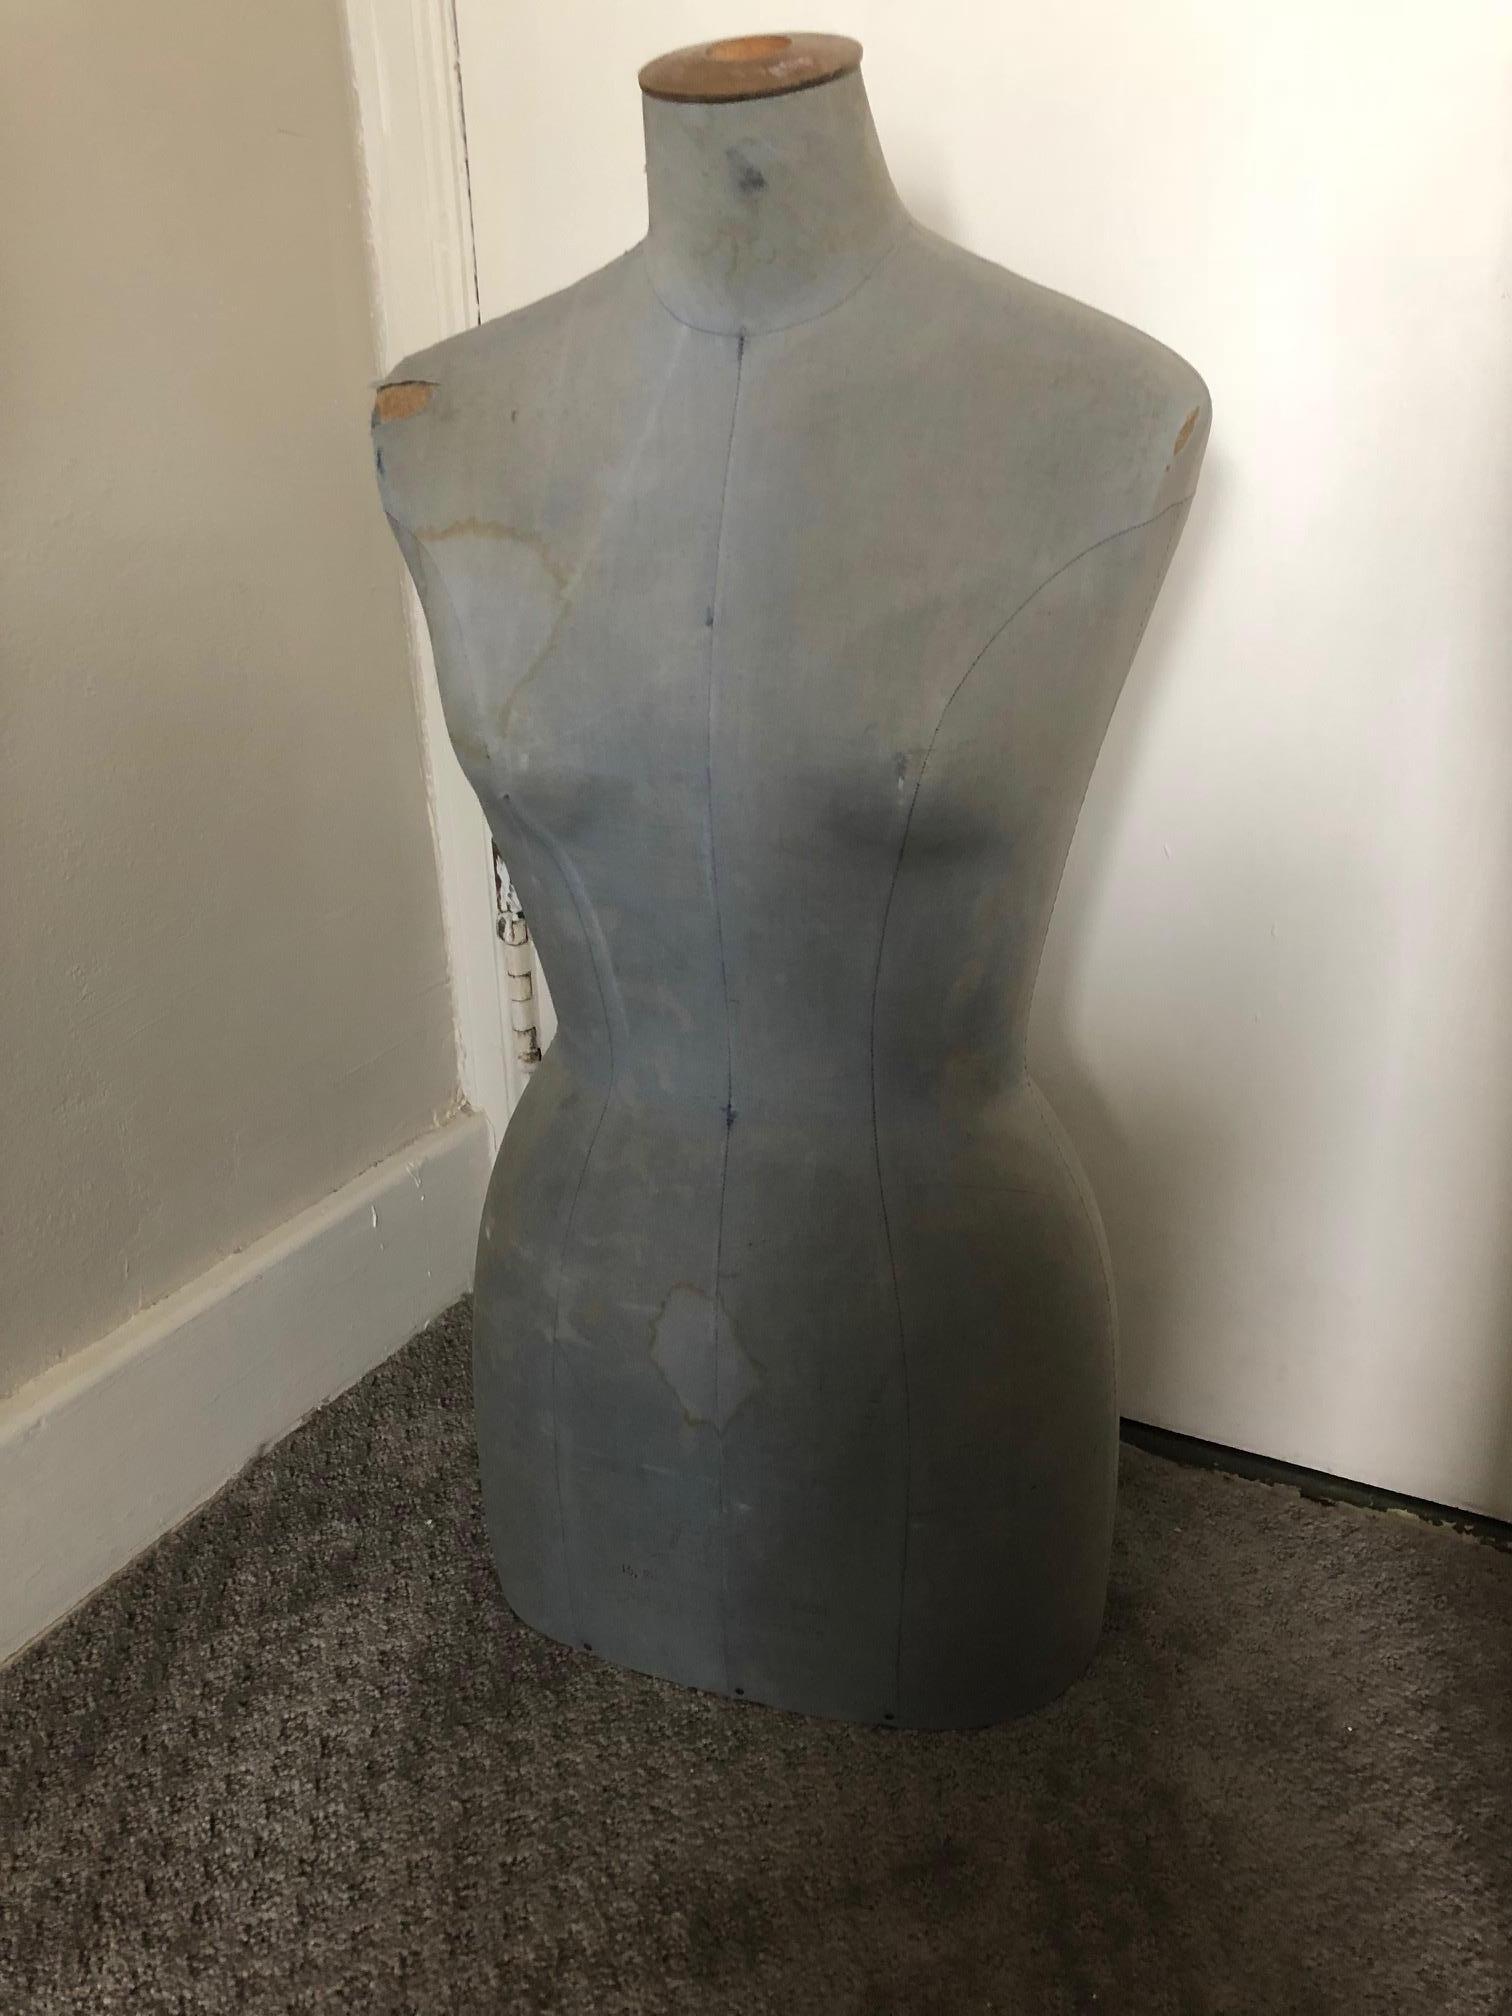 French dress form bust from Paris Opera costuming department. Tabletop model in light blue denim color. Hectic working years of use has left faded stains and slight tears in fabric that are as much apart of the bust's character as they are the